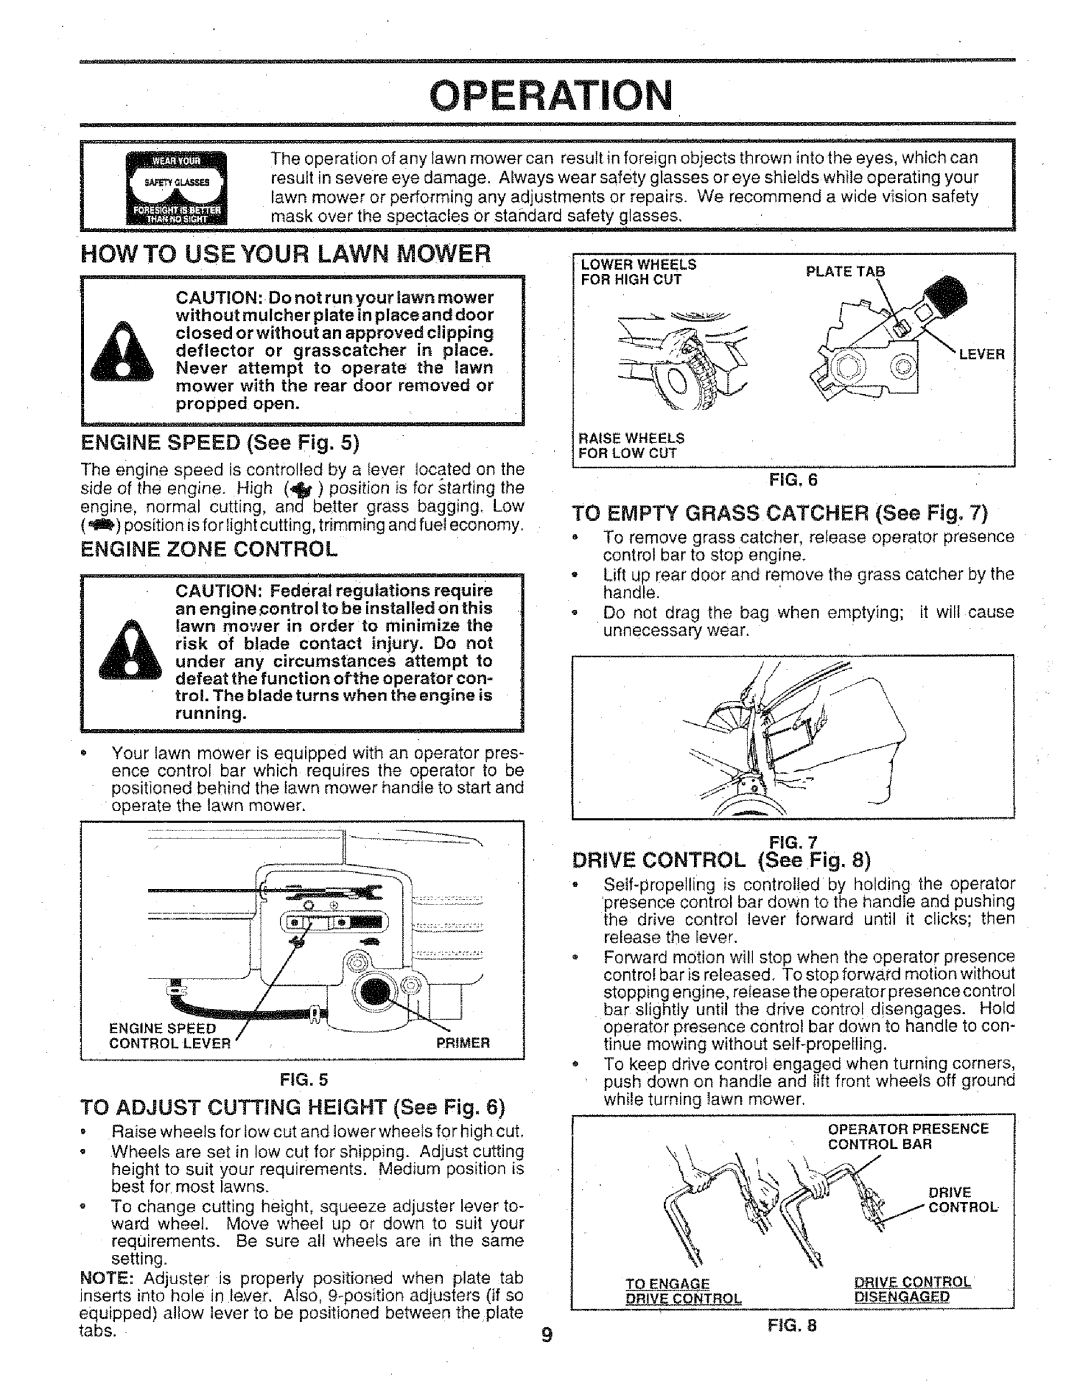 Craftsman 917.3773 Operation, How To Use Your Lawn Mower, ENGINE SPEED See Fig, Engine Zone Control, DRIVE CONTROL See Fig 